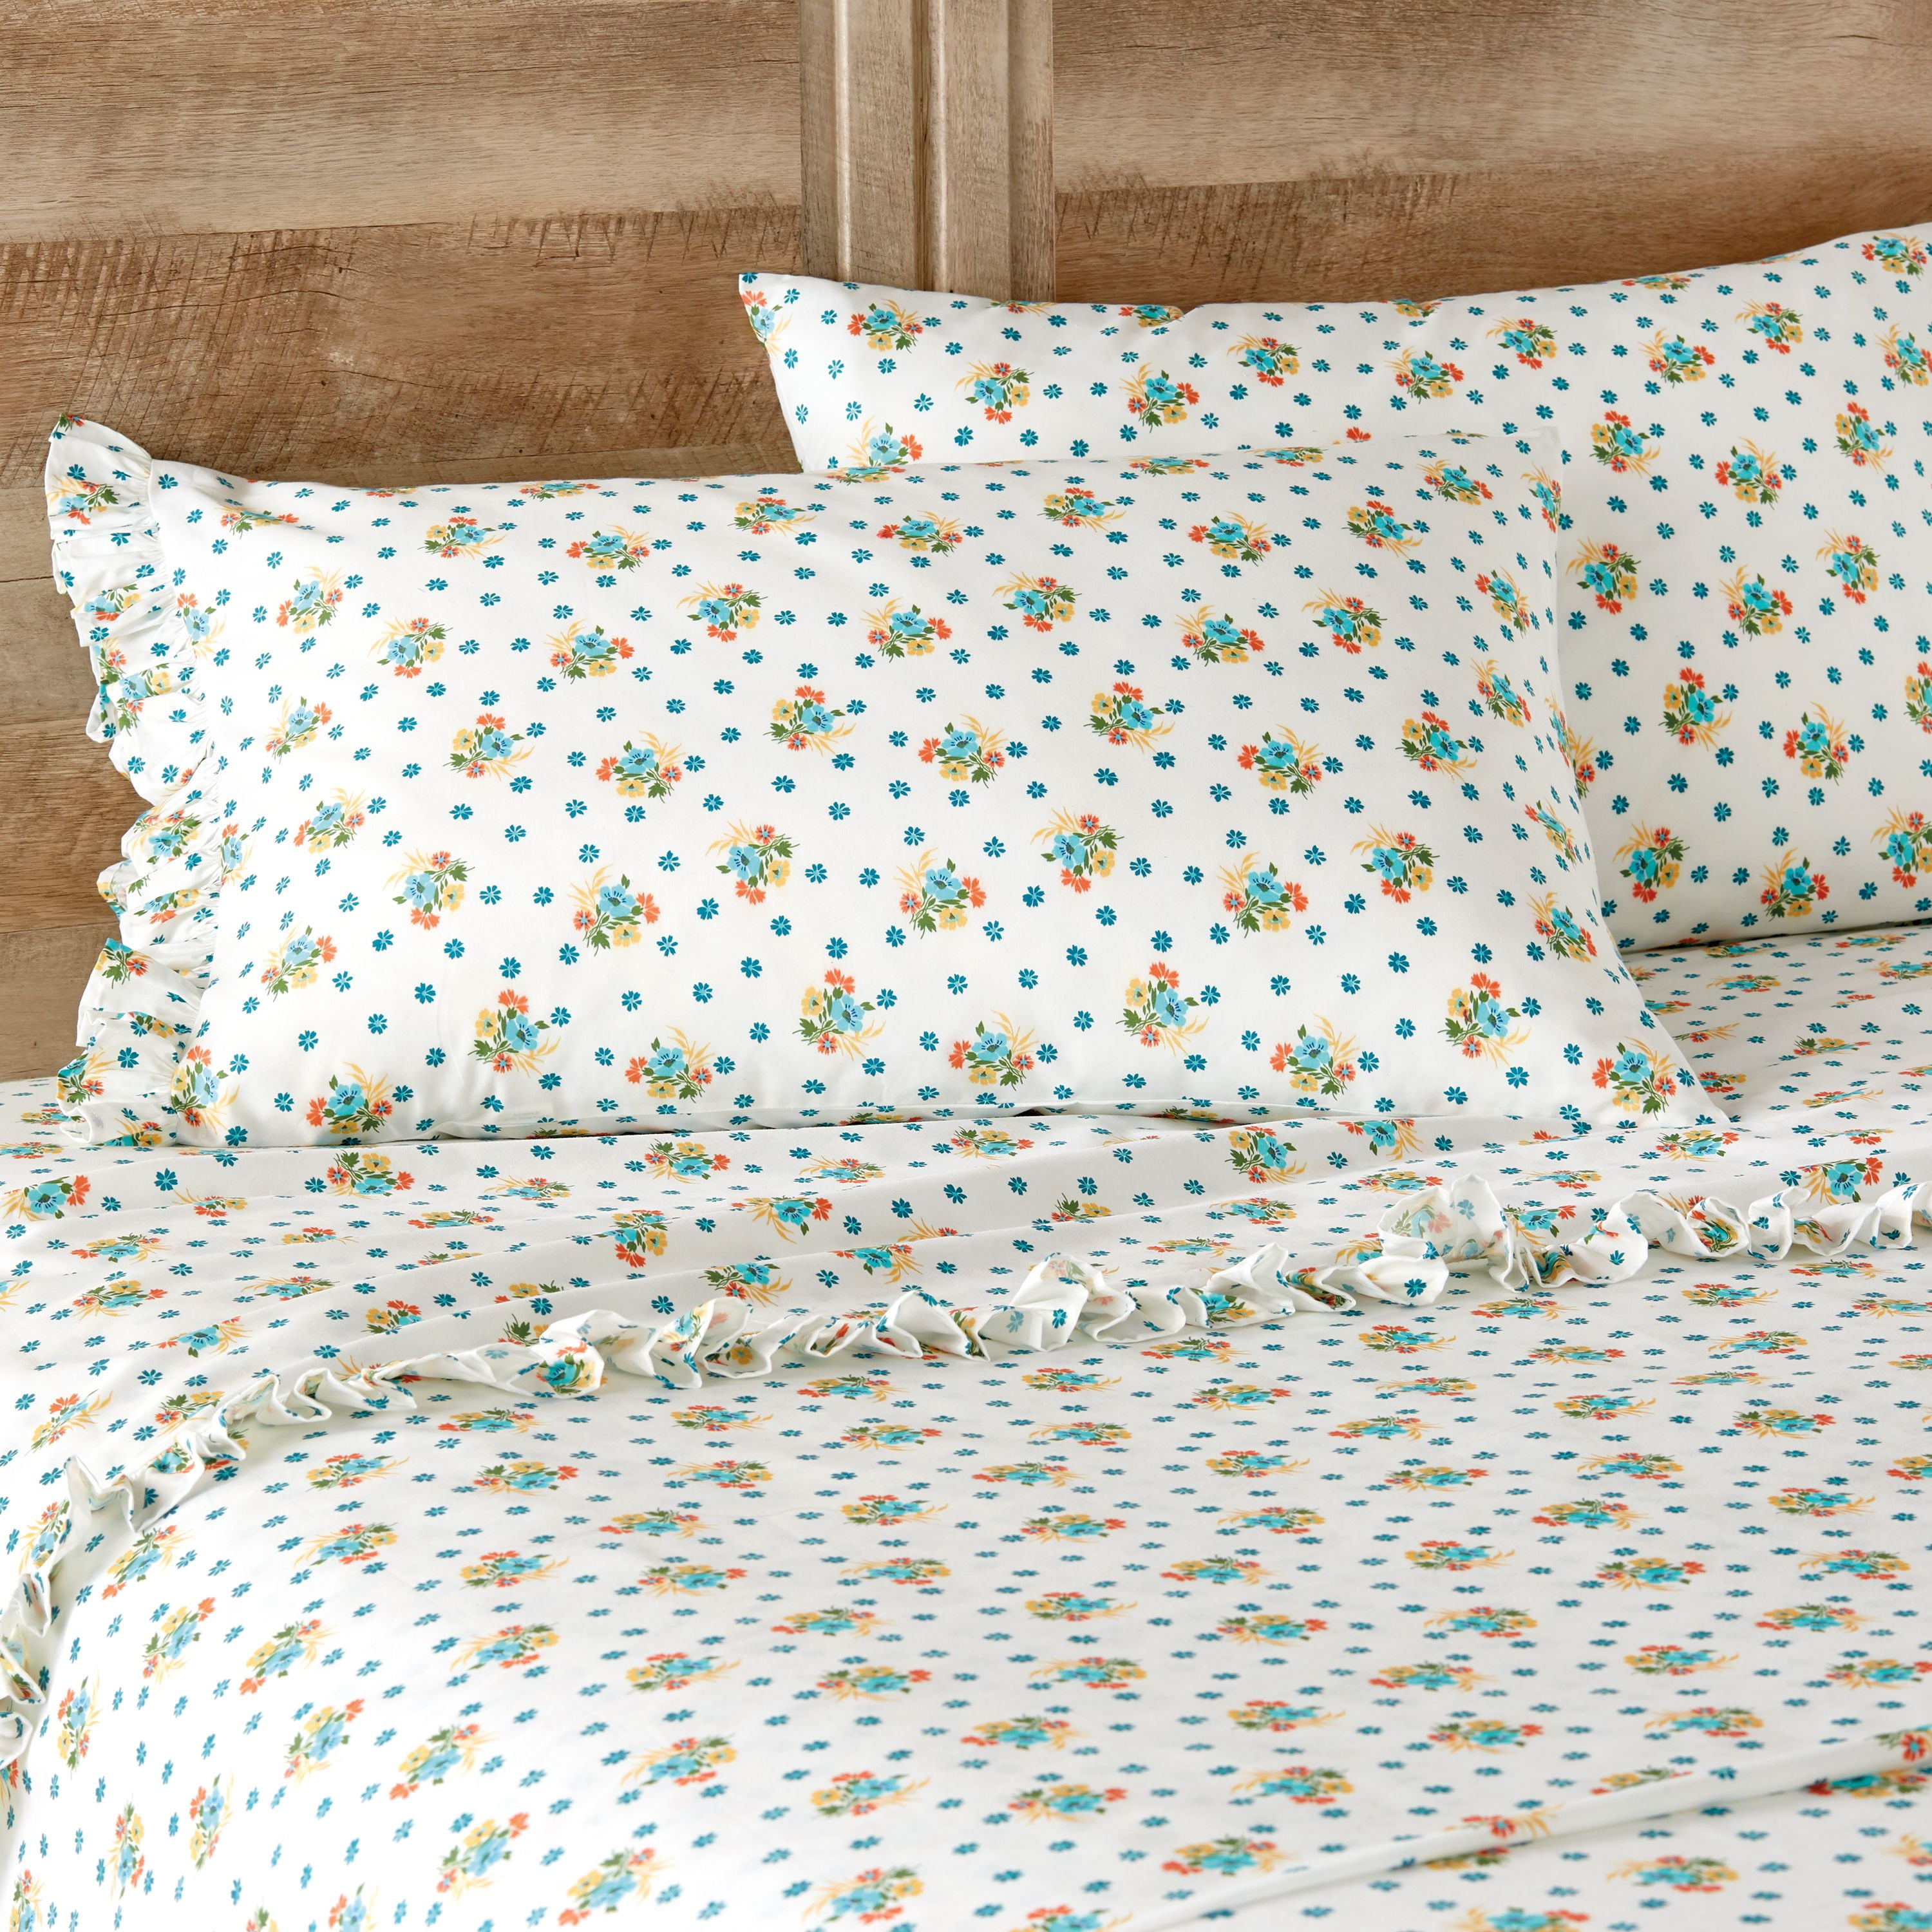 The Pioneer Woman Ditsy Floral Ruffle Queen Sheet Set